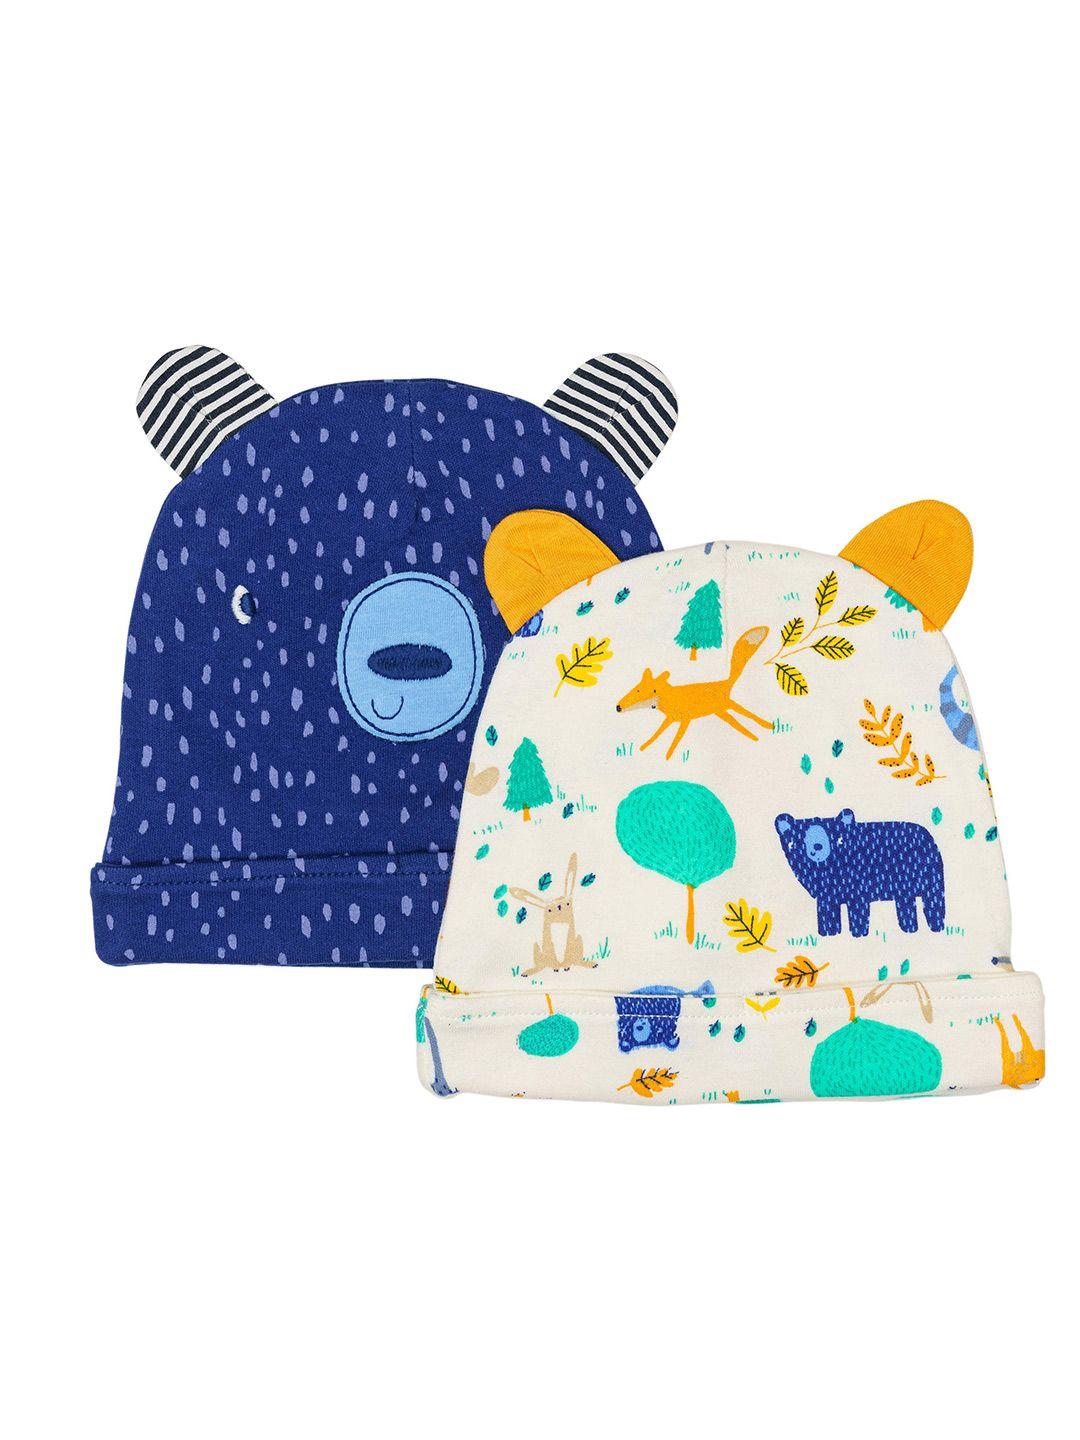 h by hamleys infants kids pack of 2 printed cotton beanie